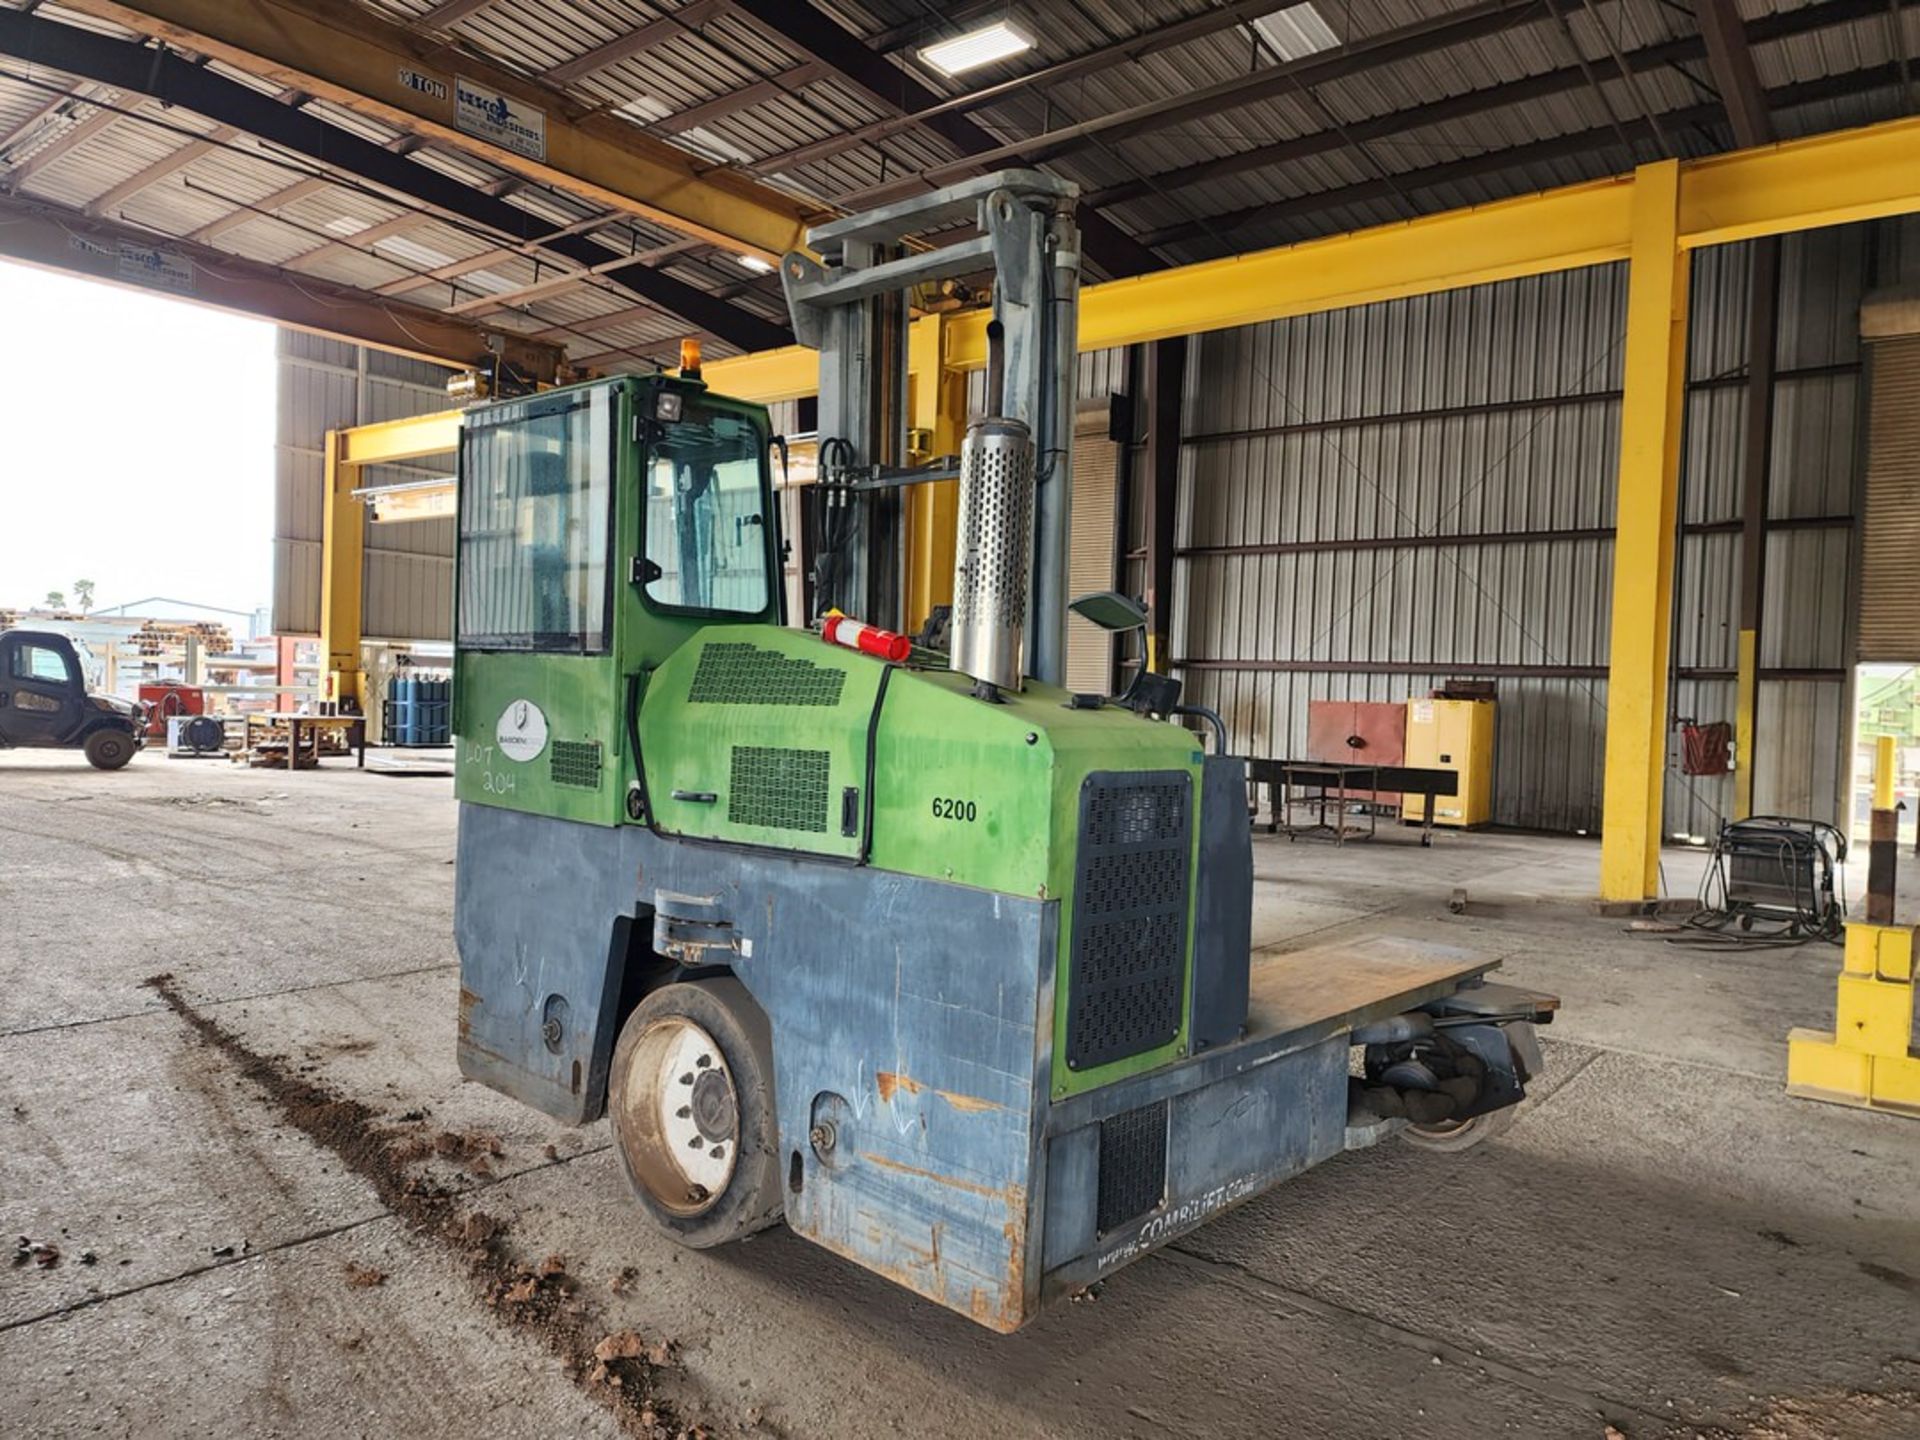 2011 Combi-Lift GL43260DA66 Multi-Directional Forklift 2-Stage Mast; Cap: 26,000lbs; Hrs: 3,773 ( - Image 6 of 11